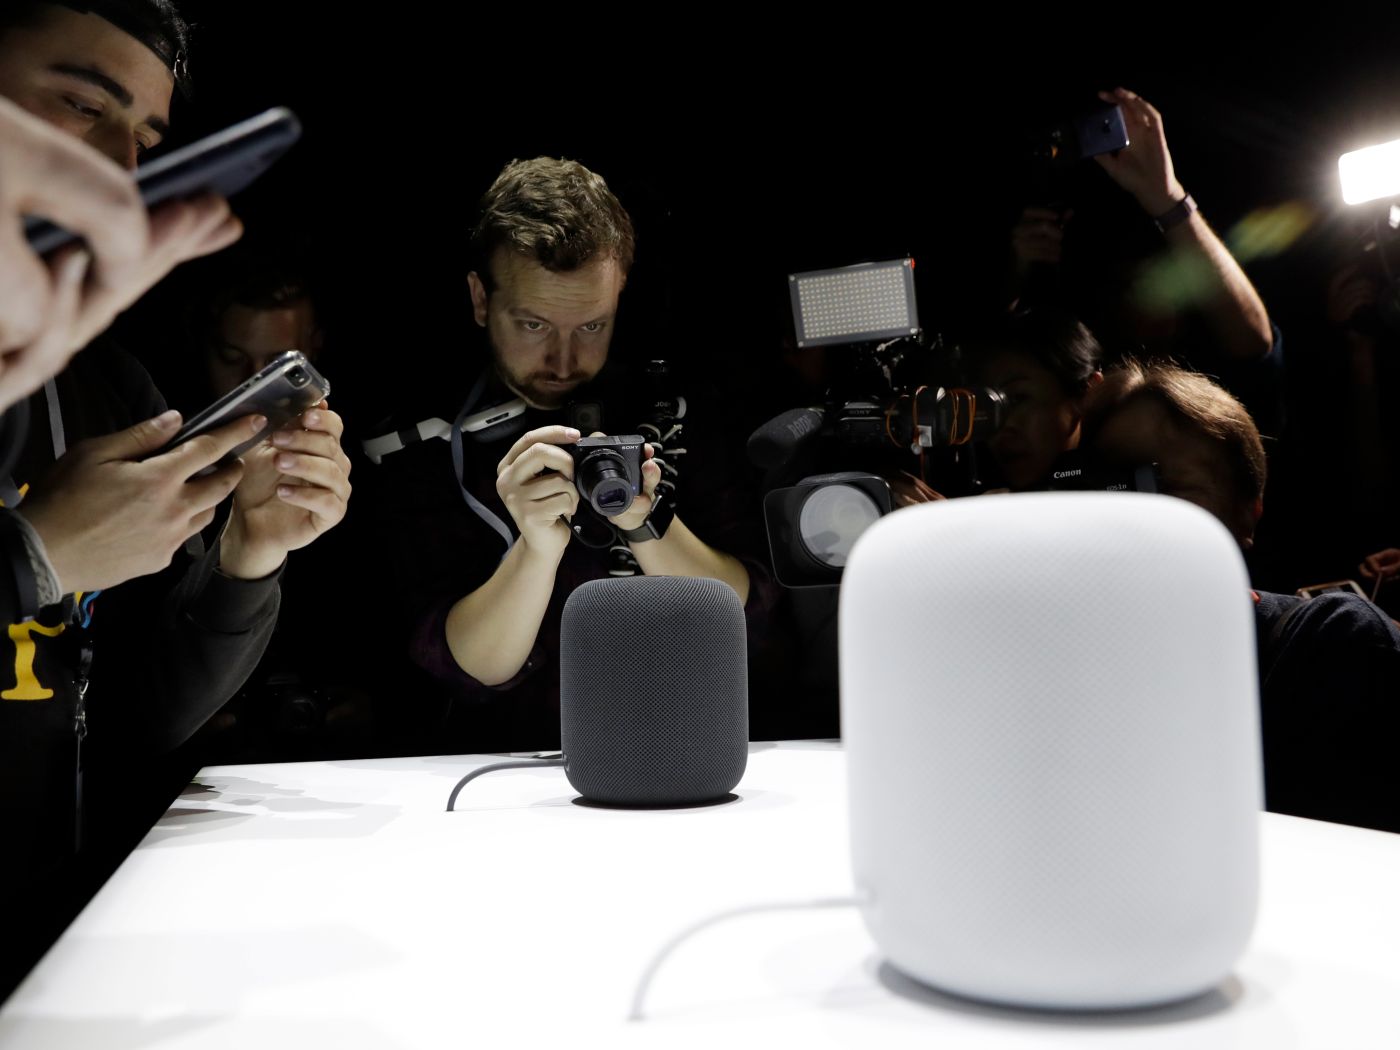 apples_homepod_could_be_in_short_supply_when_it_launches.jpg